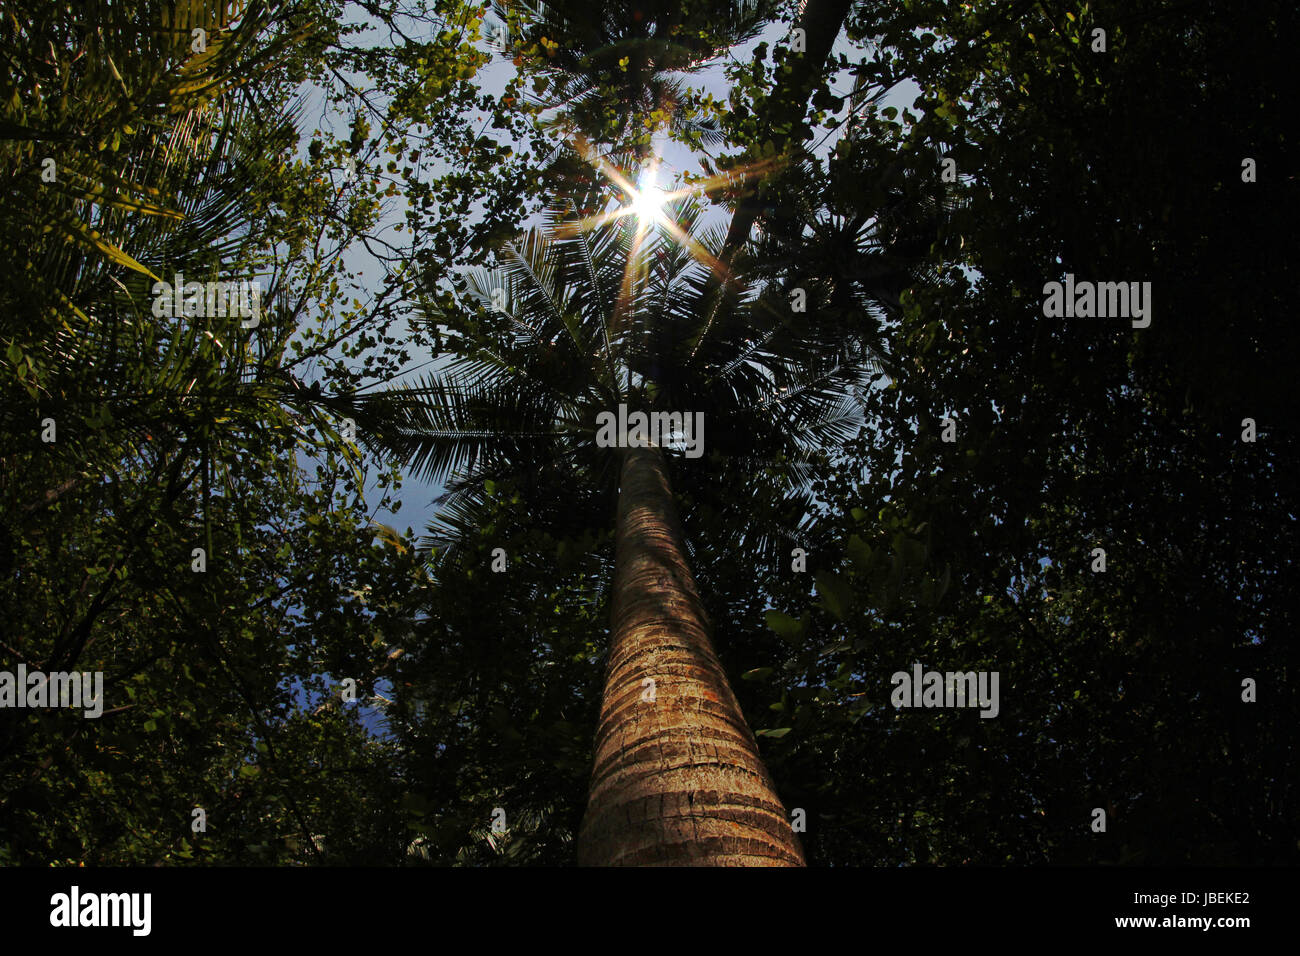 the large coconut tree Stock Photo